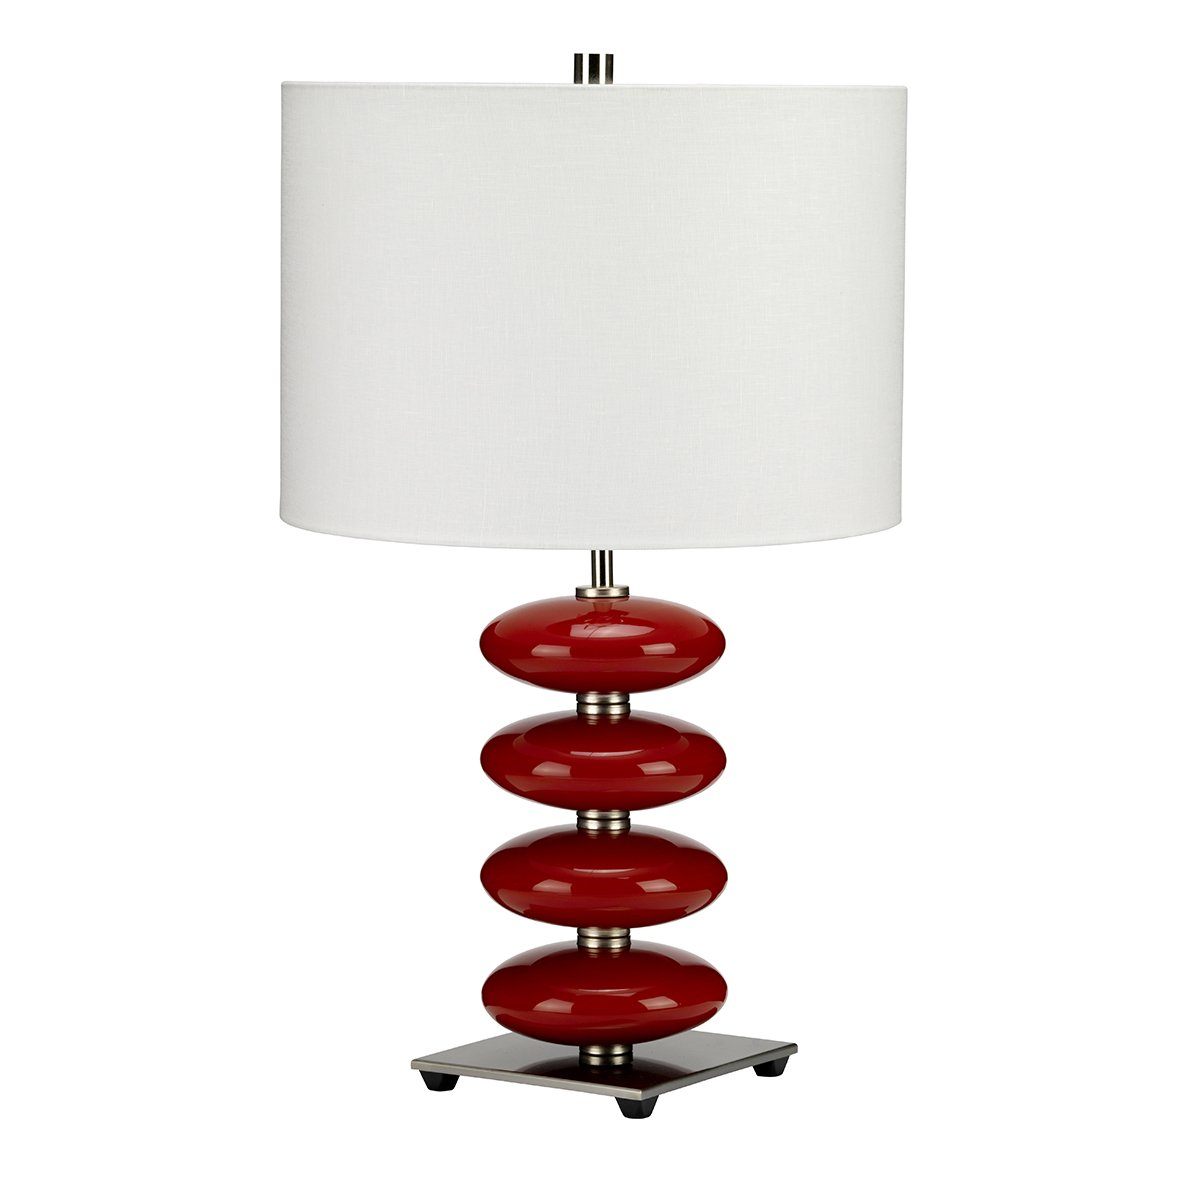 Oldmalden Red Table Lamp c/w Shade - ID 8385